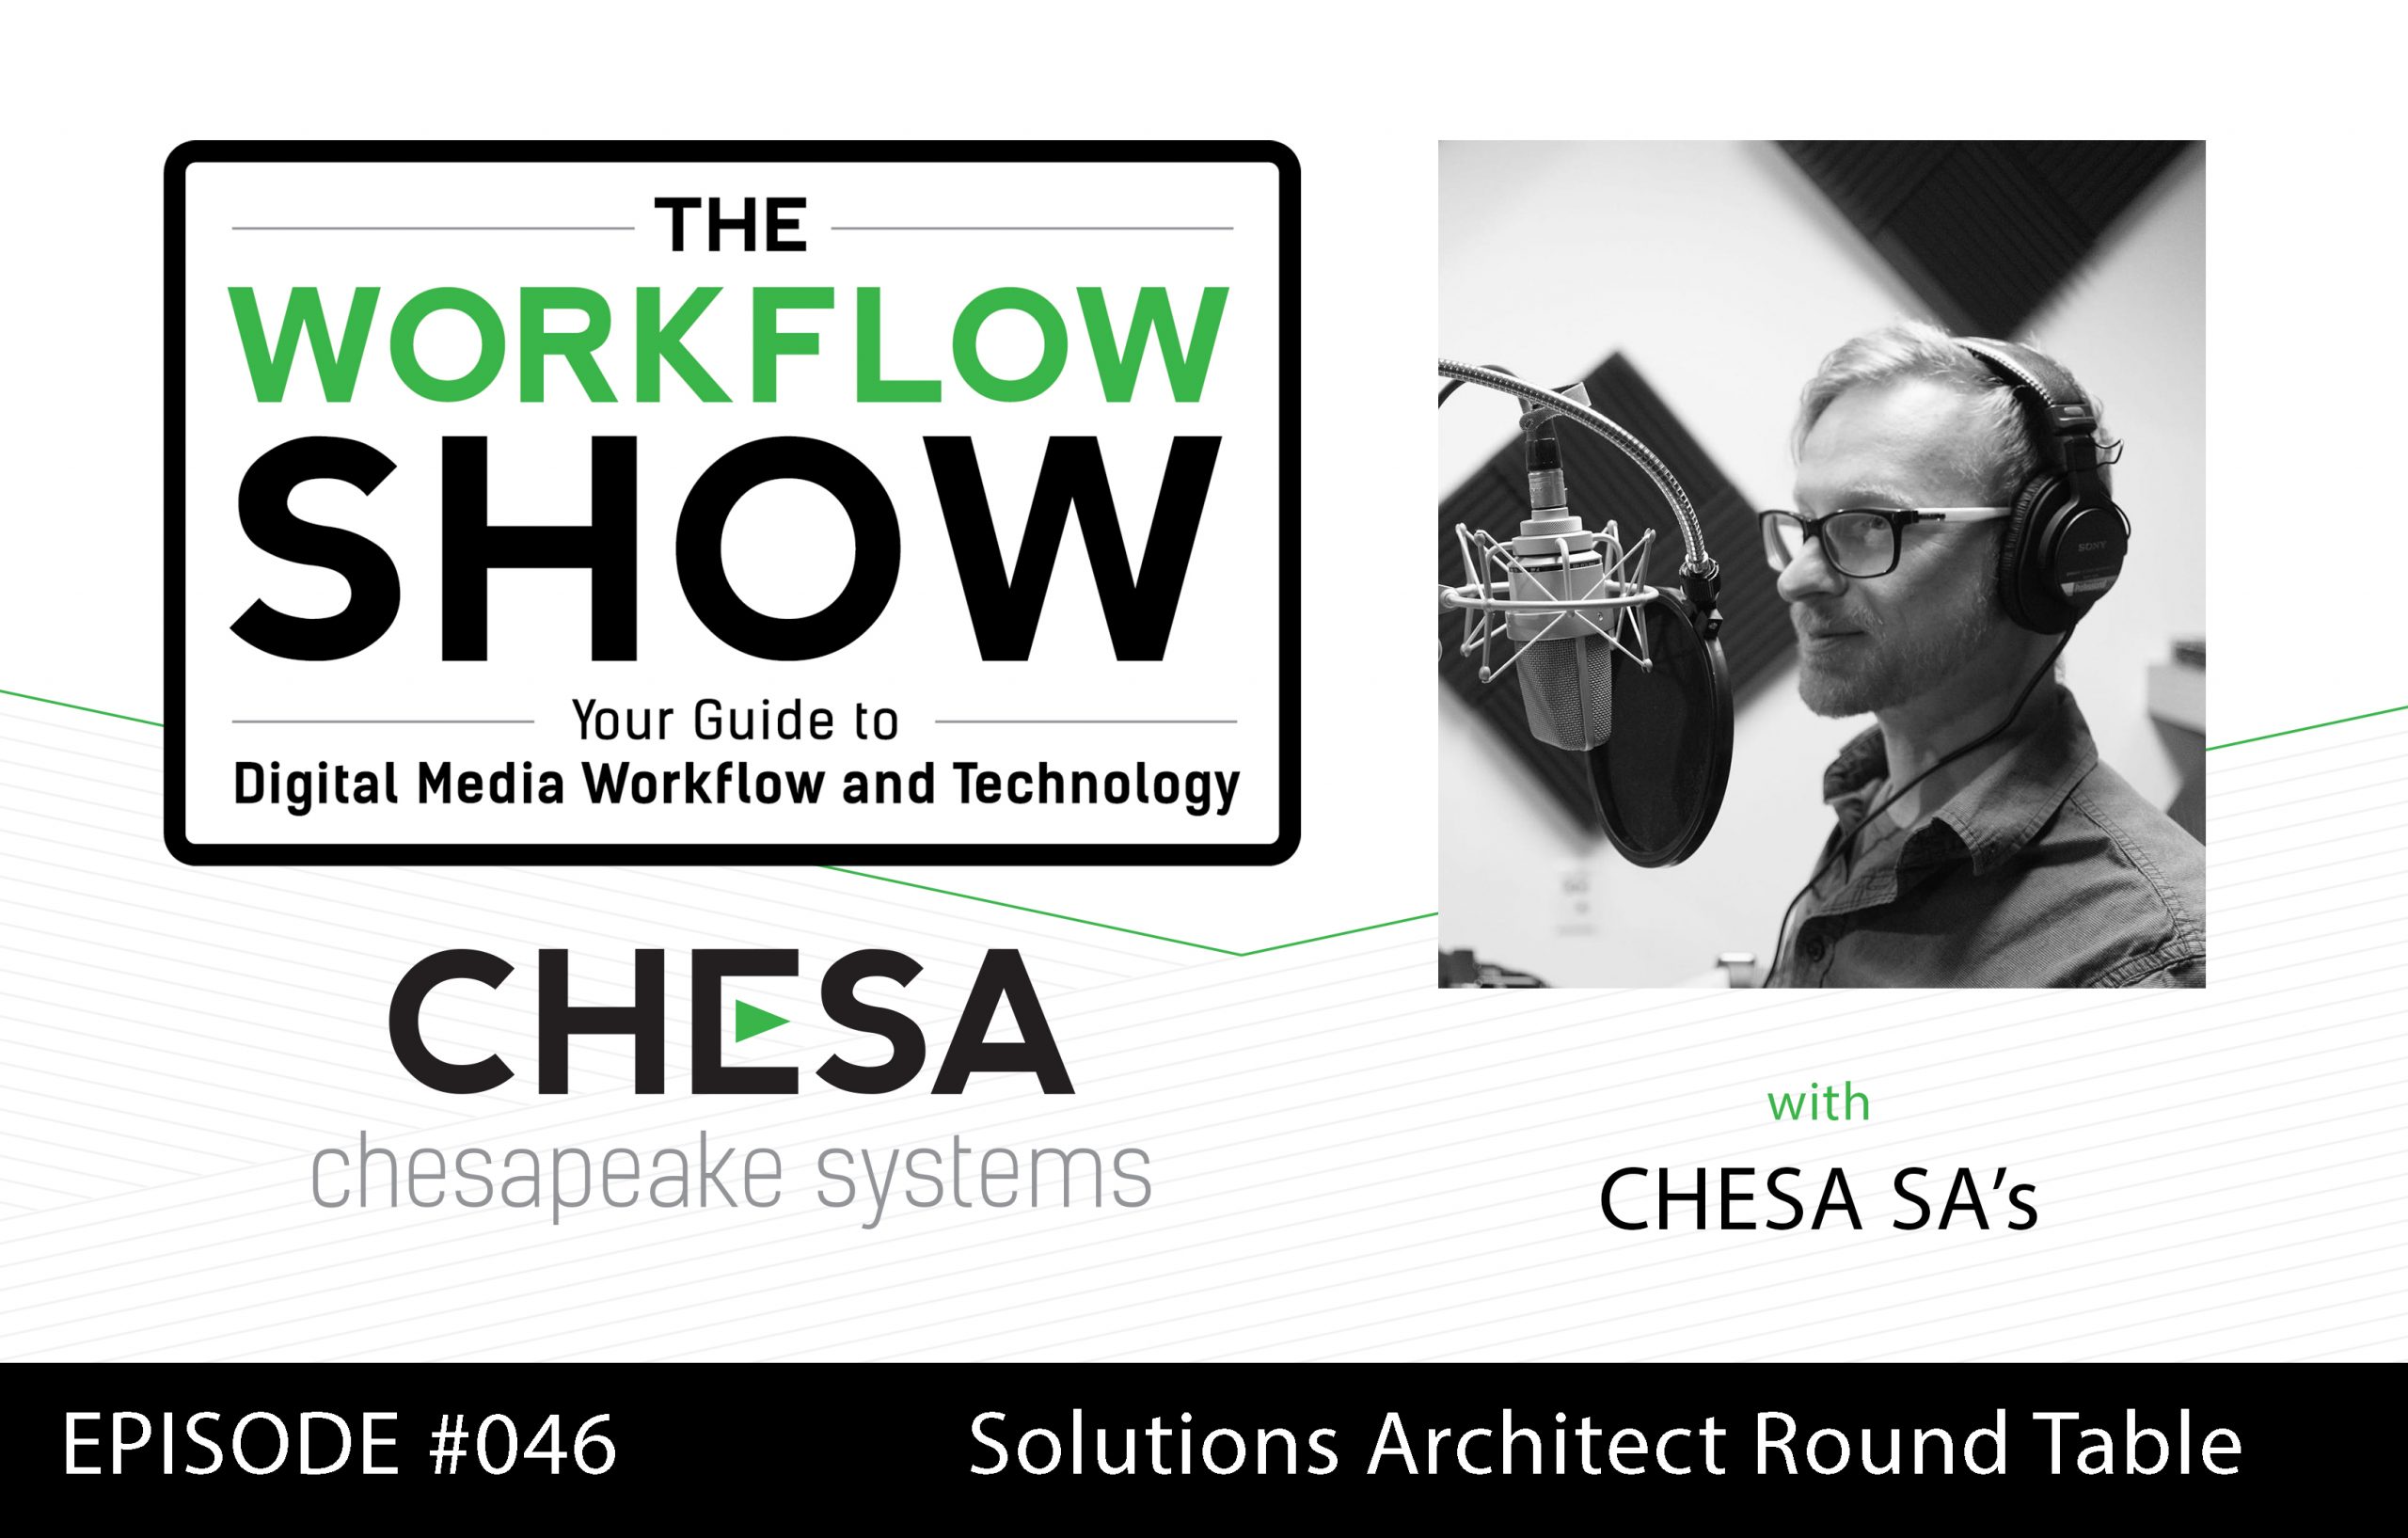 #46 "Solutions Architect Round Table — Remote Workflow Strategy"